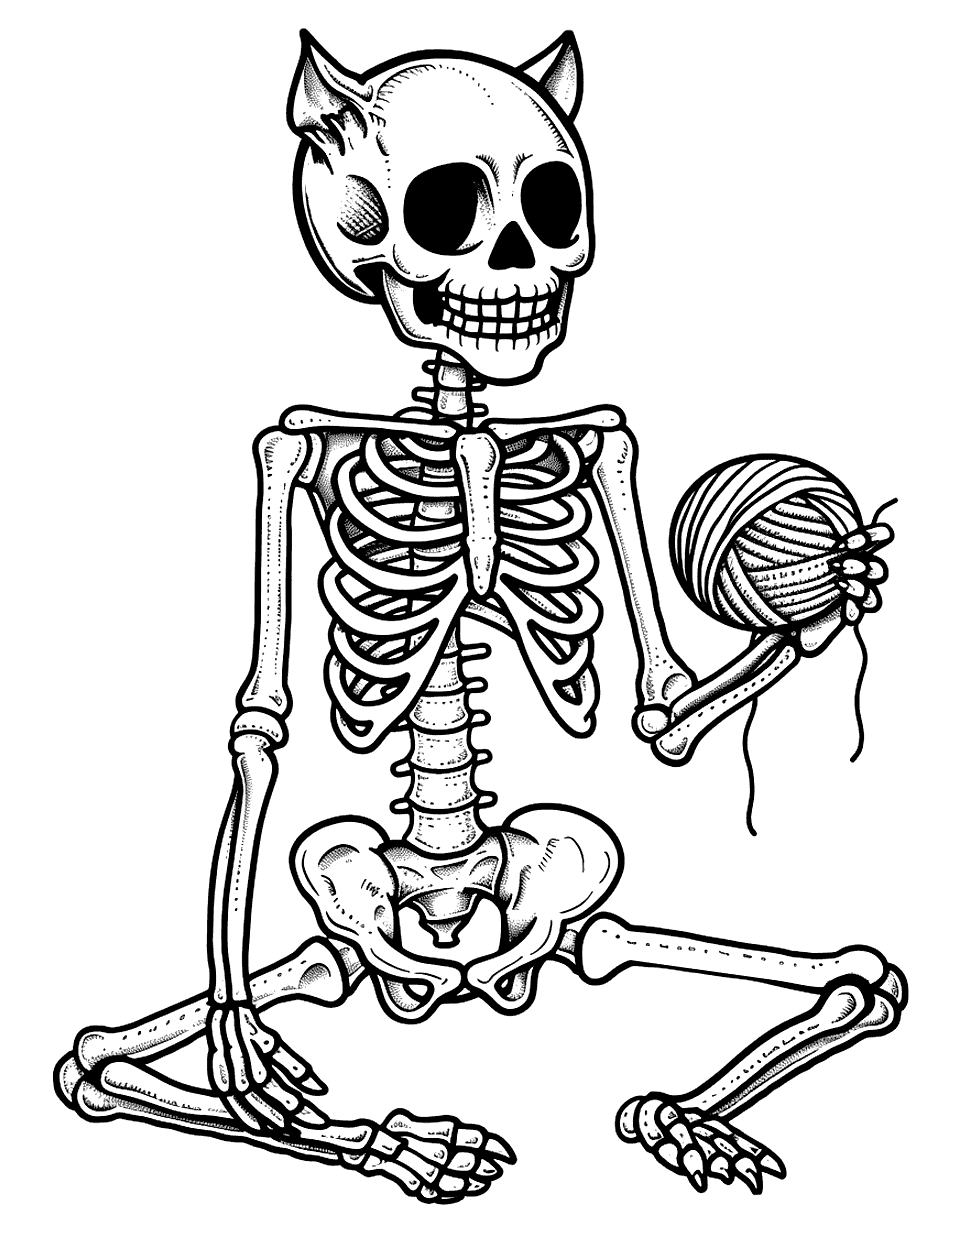 Cute Cat Skeleton Coloring Page - A playful cat like skeleton with a ball of yarn.